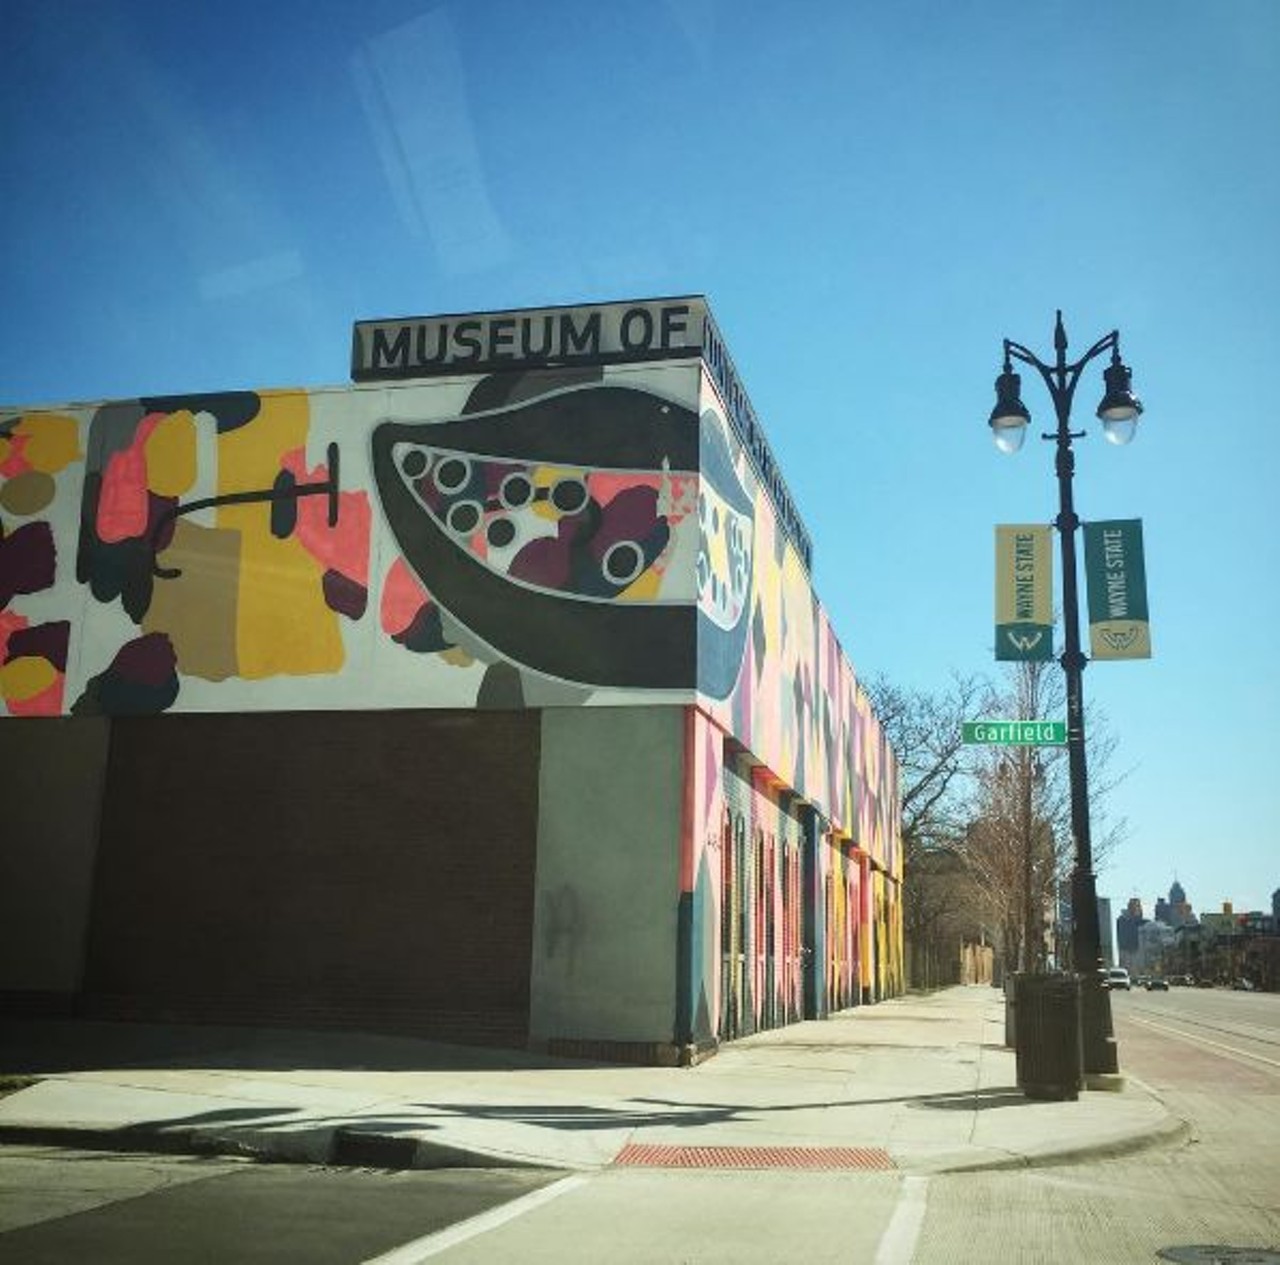 Visit MOCAD &#151; If the DIA is a little too classy for you, then check out the Museum of Contemporary Art Detroit for some modern art and even a cocktail. The exhibitions are always thought-provoking, and it&#146;s a nice way to show your intellectual side to you date.